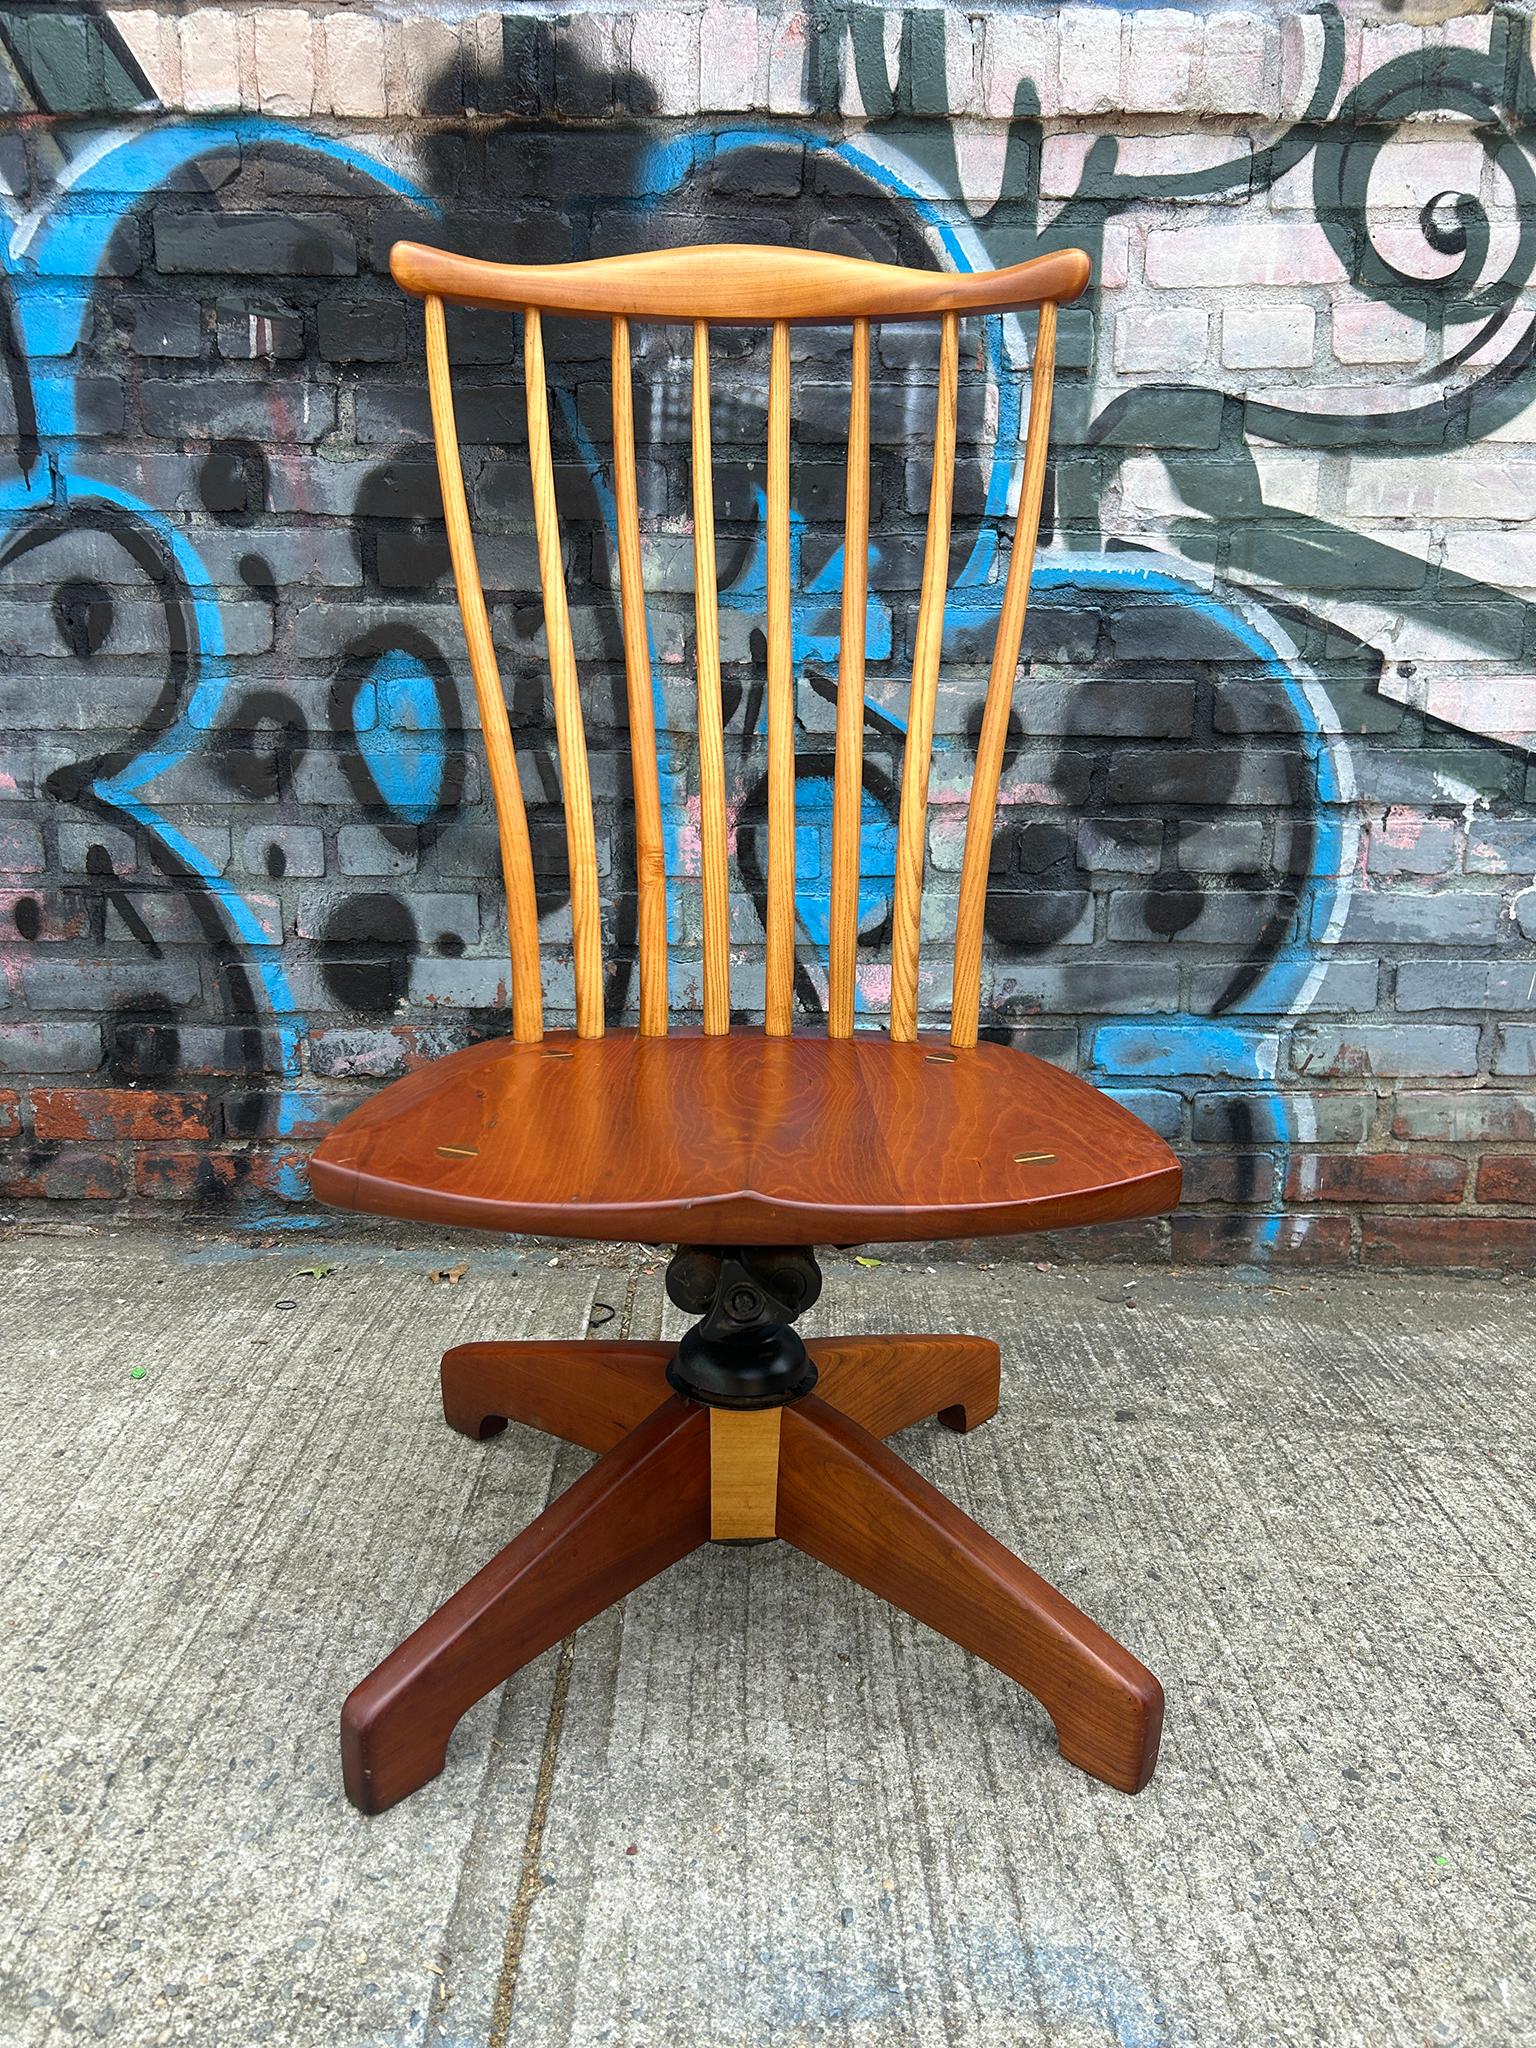 Mid-Century Modern Studio Craft Arts Swivel Spindle Back chair in the style of Thomas Moser woodworker. Has 4 point base that has steel office chair reclining springs and manual adjustable seat height. Chair also swivels 360 degree. Great high